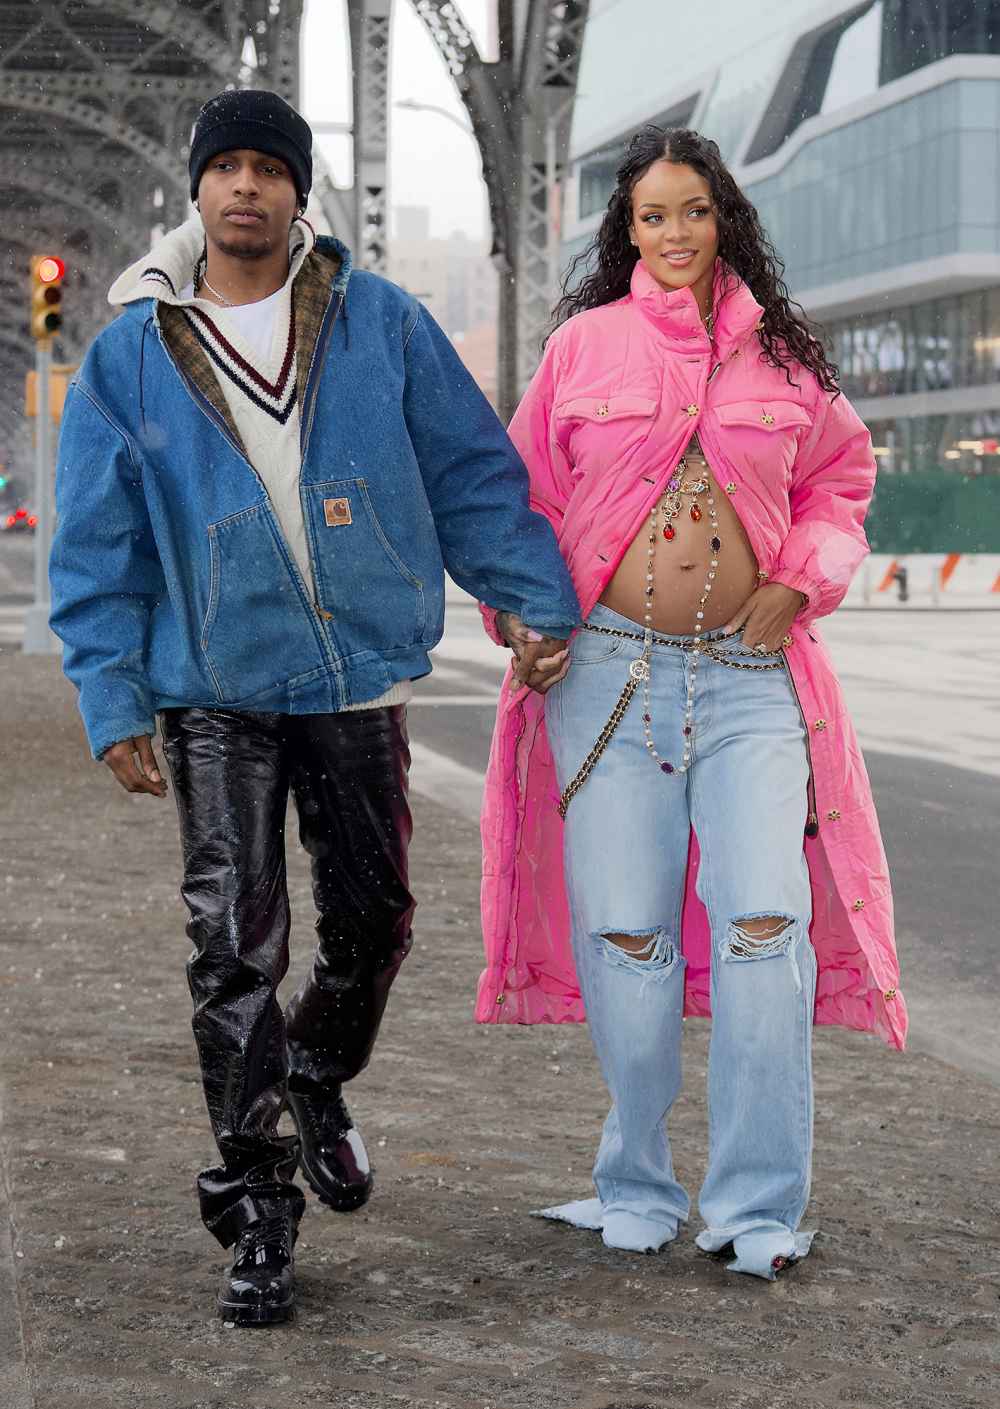 The Best ASAP Rocky Outfits